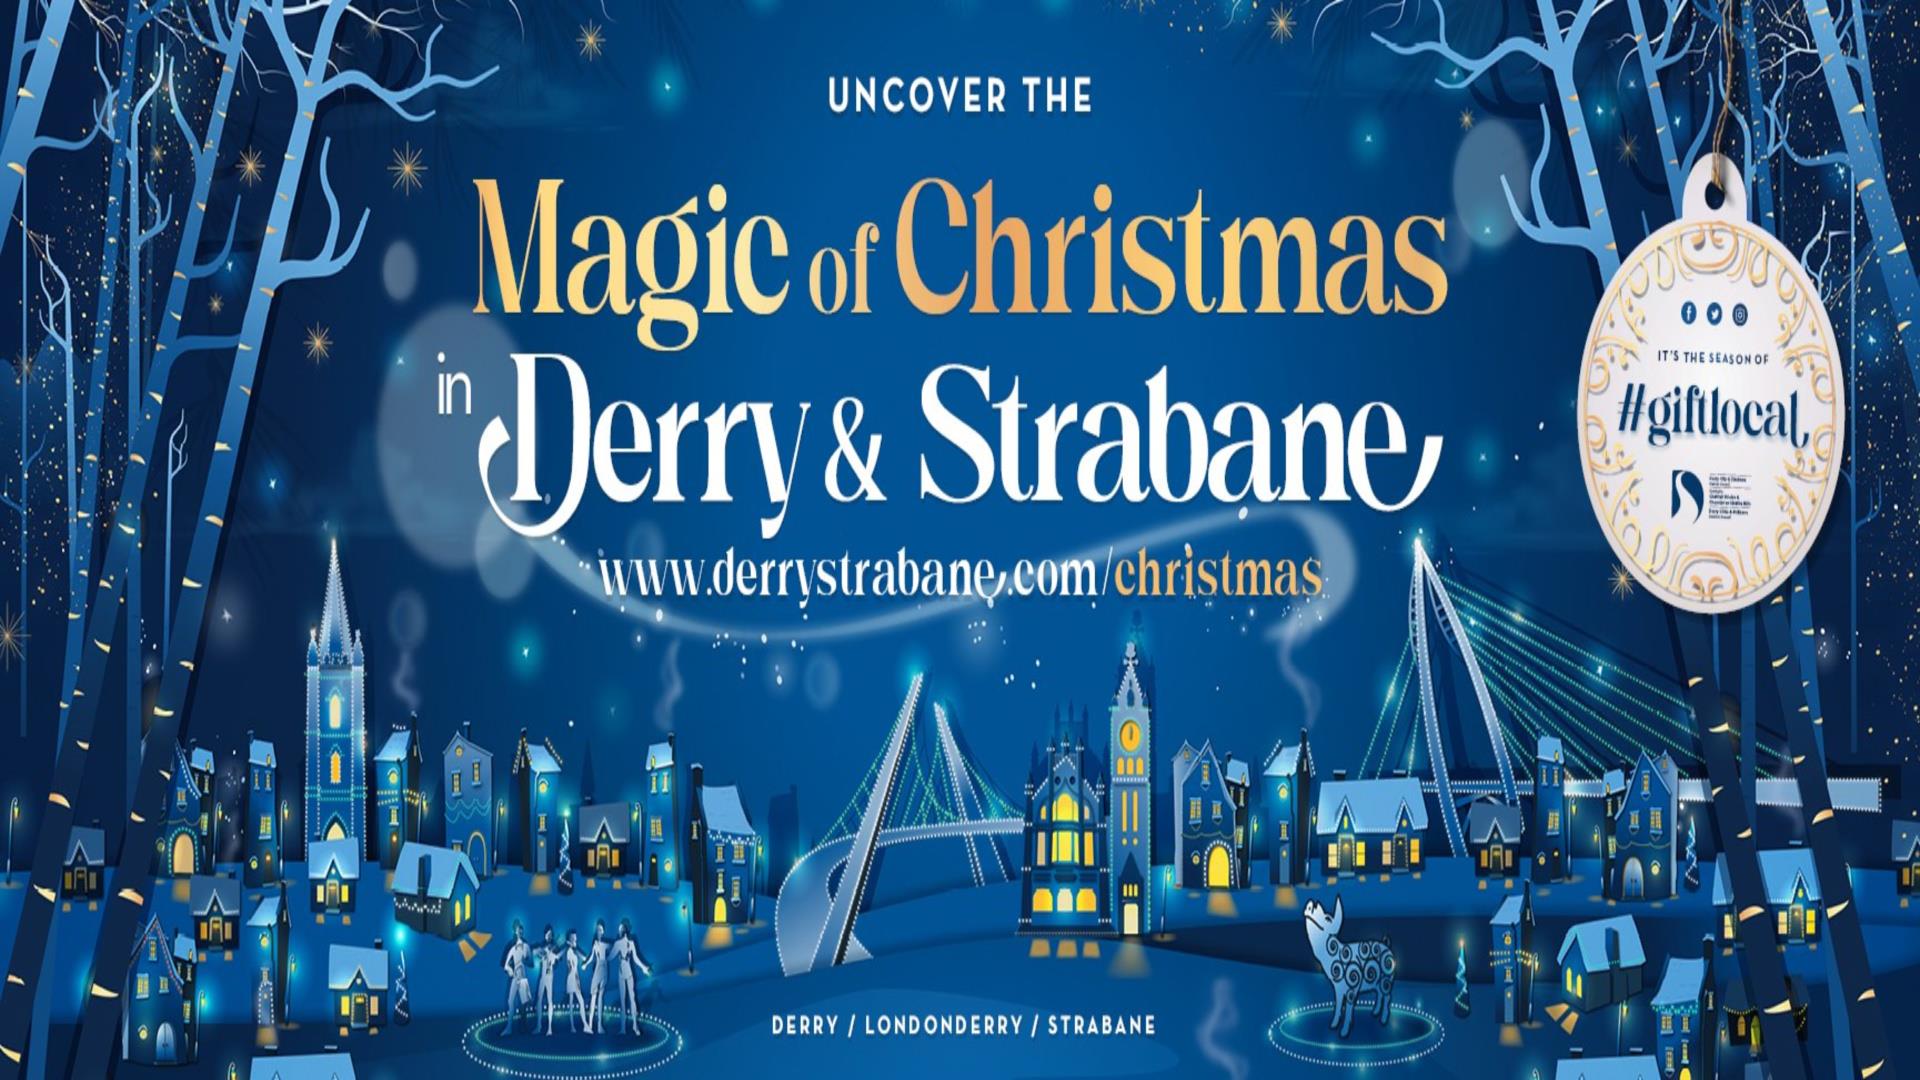 This is a promotional poster for the Christmas events organised by the Derry City and Strabane District Council.